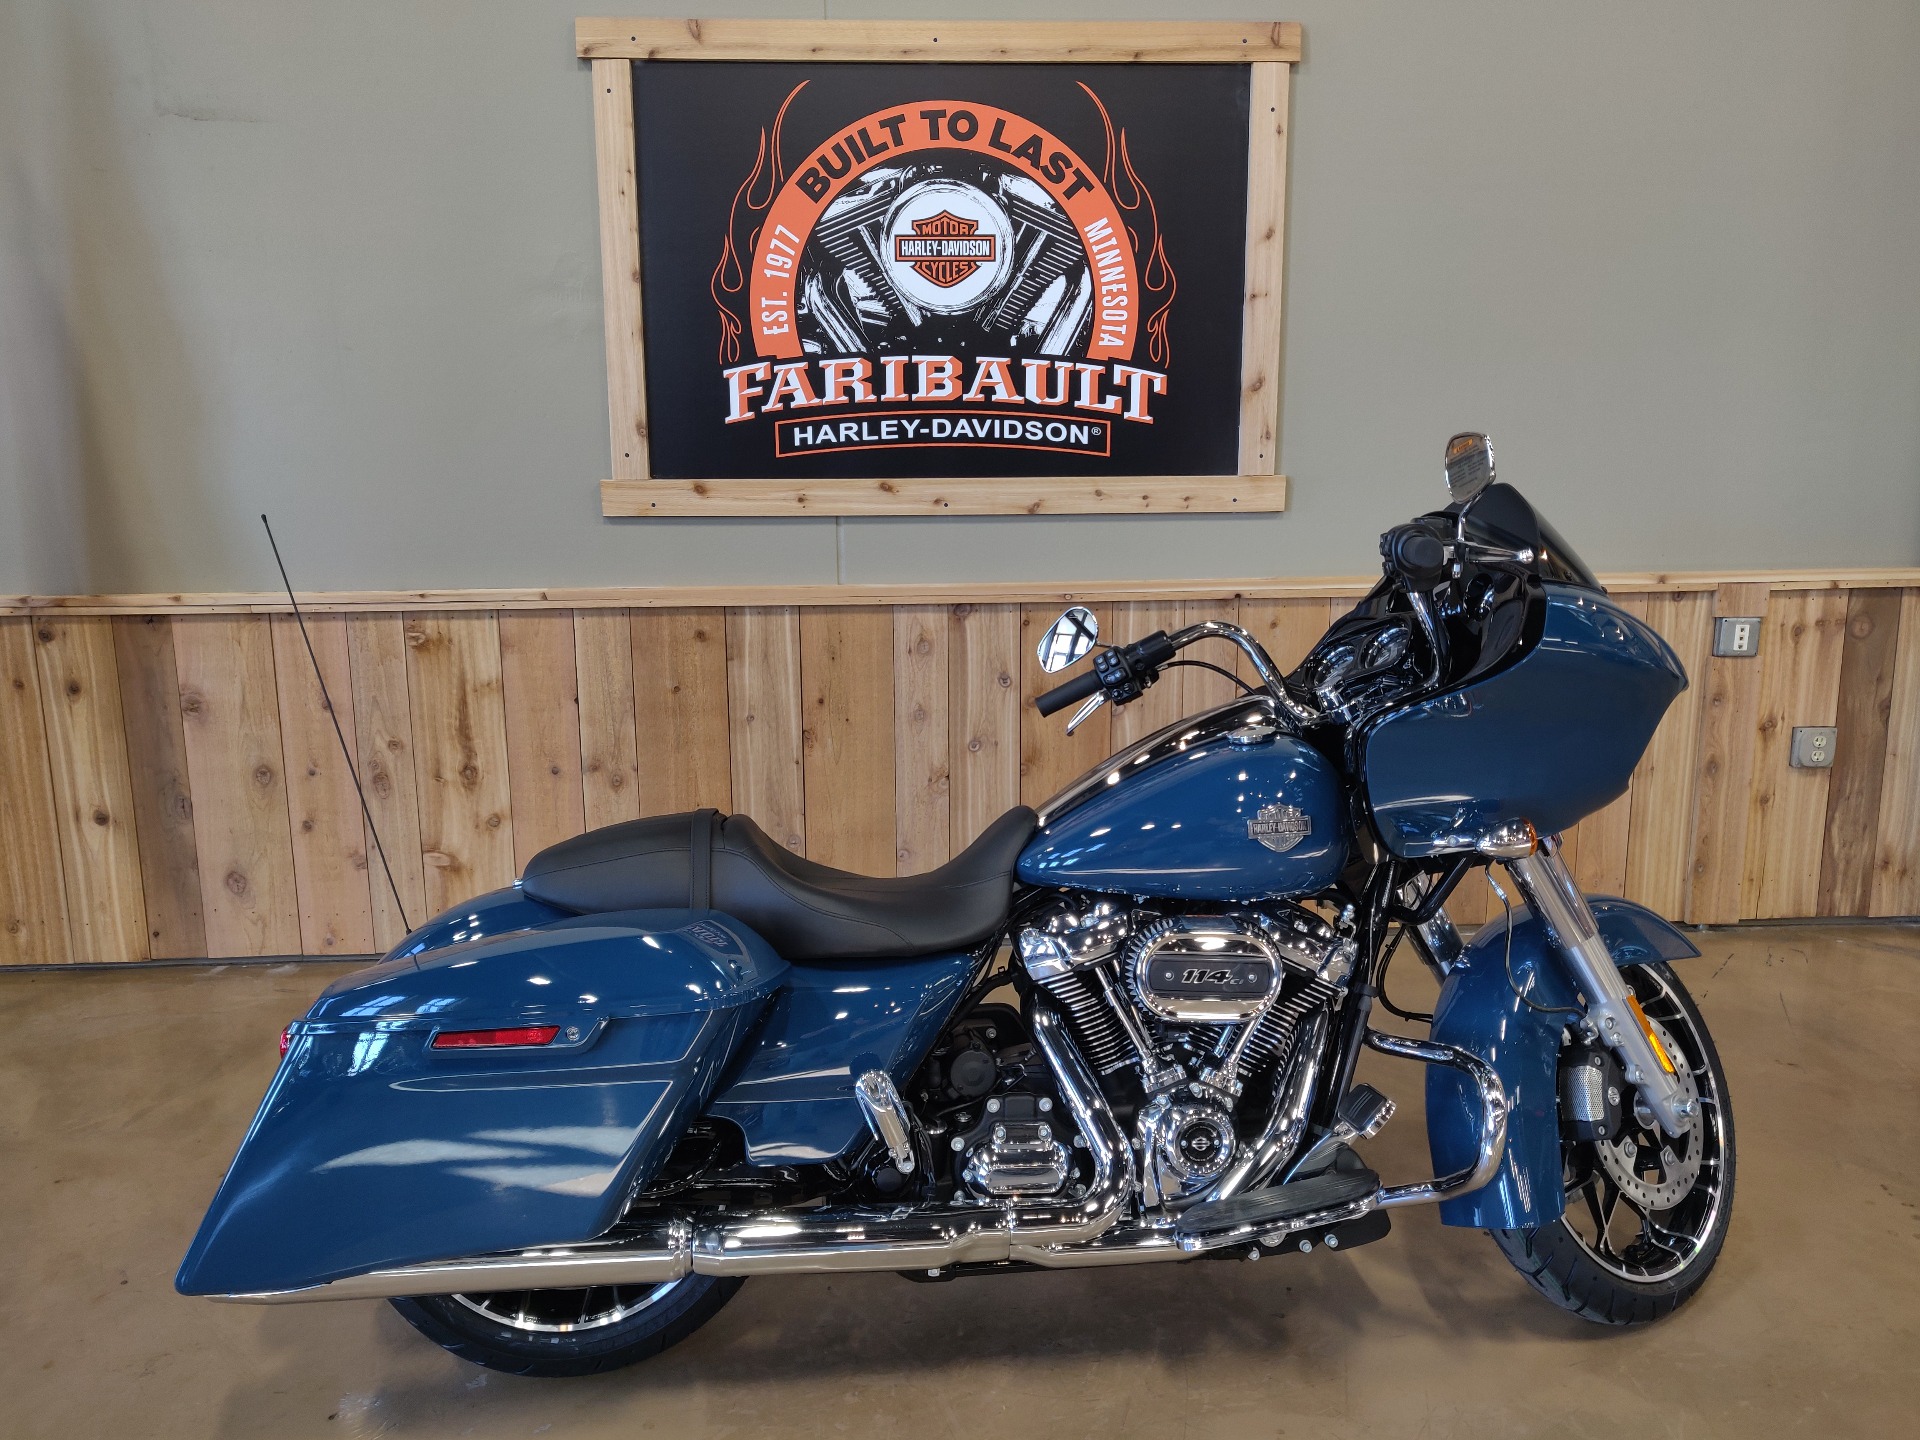 New 2021 Harley Davidson Road Glide Special Motorcycles In Faribault Mn To607811 Billiard Teal Chrome Option